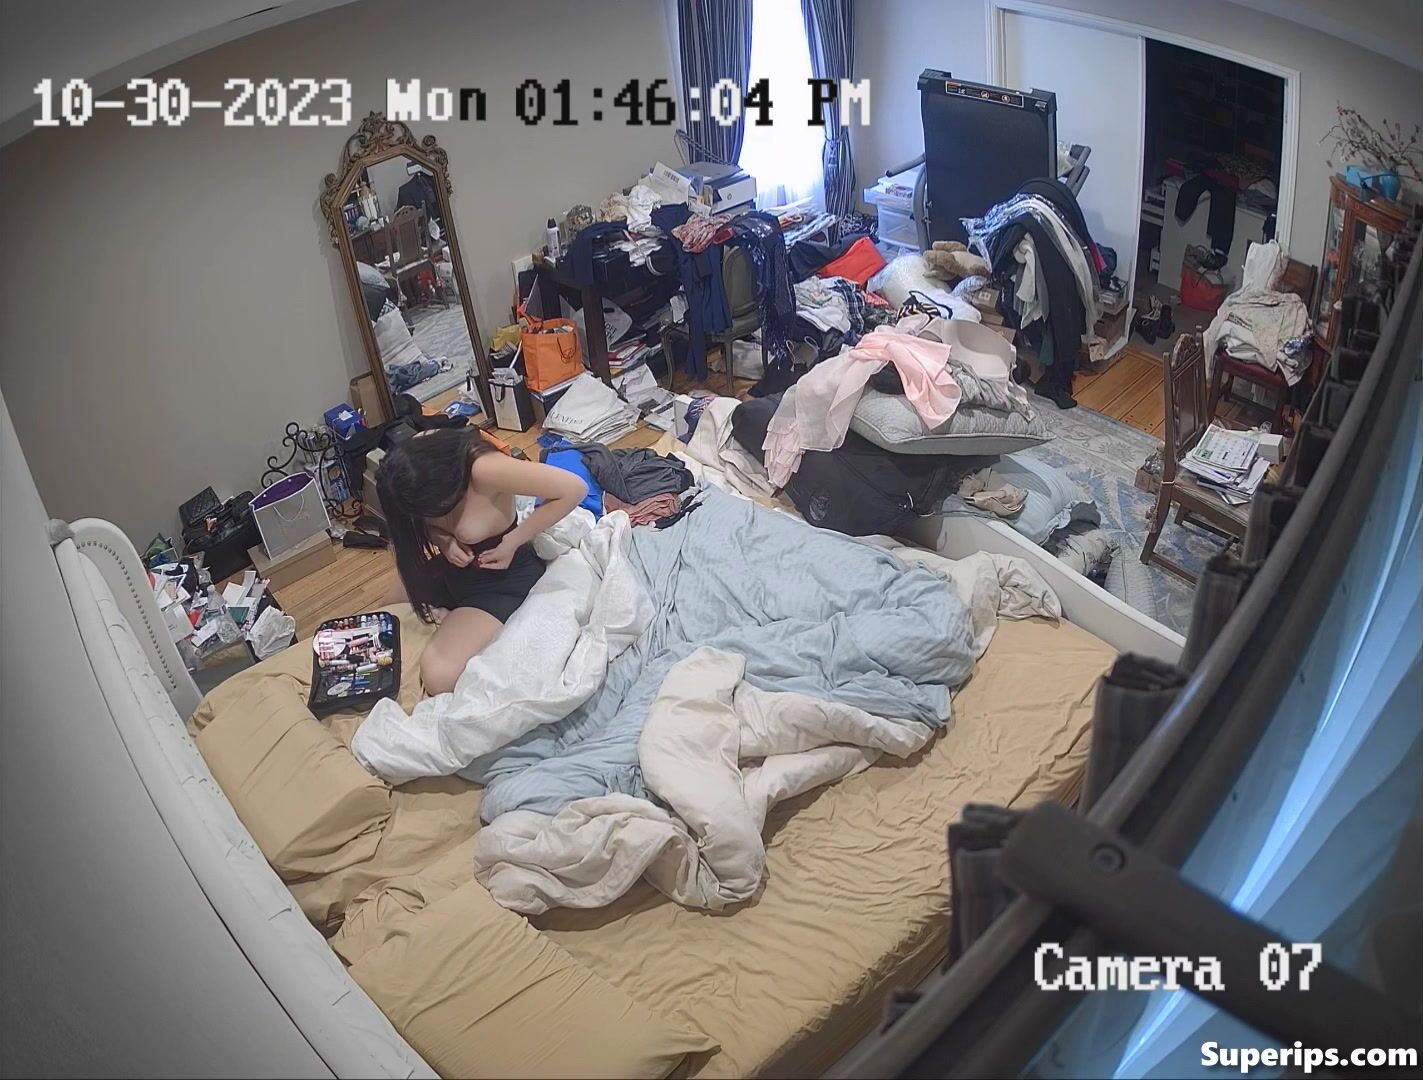 Teen American changes her clothes in her parents’ room